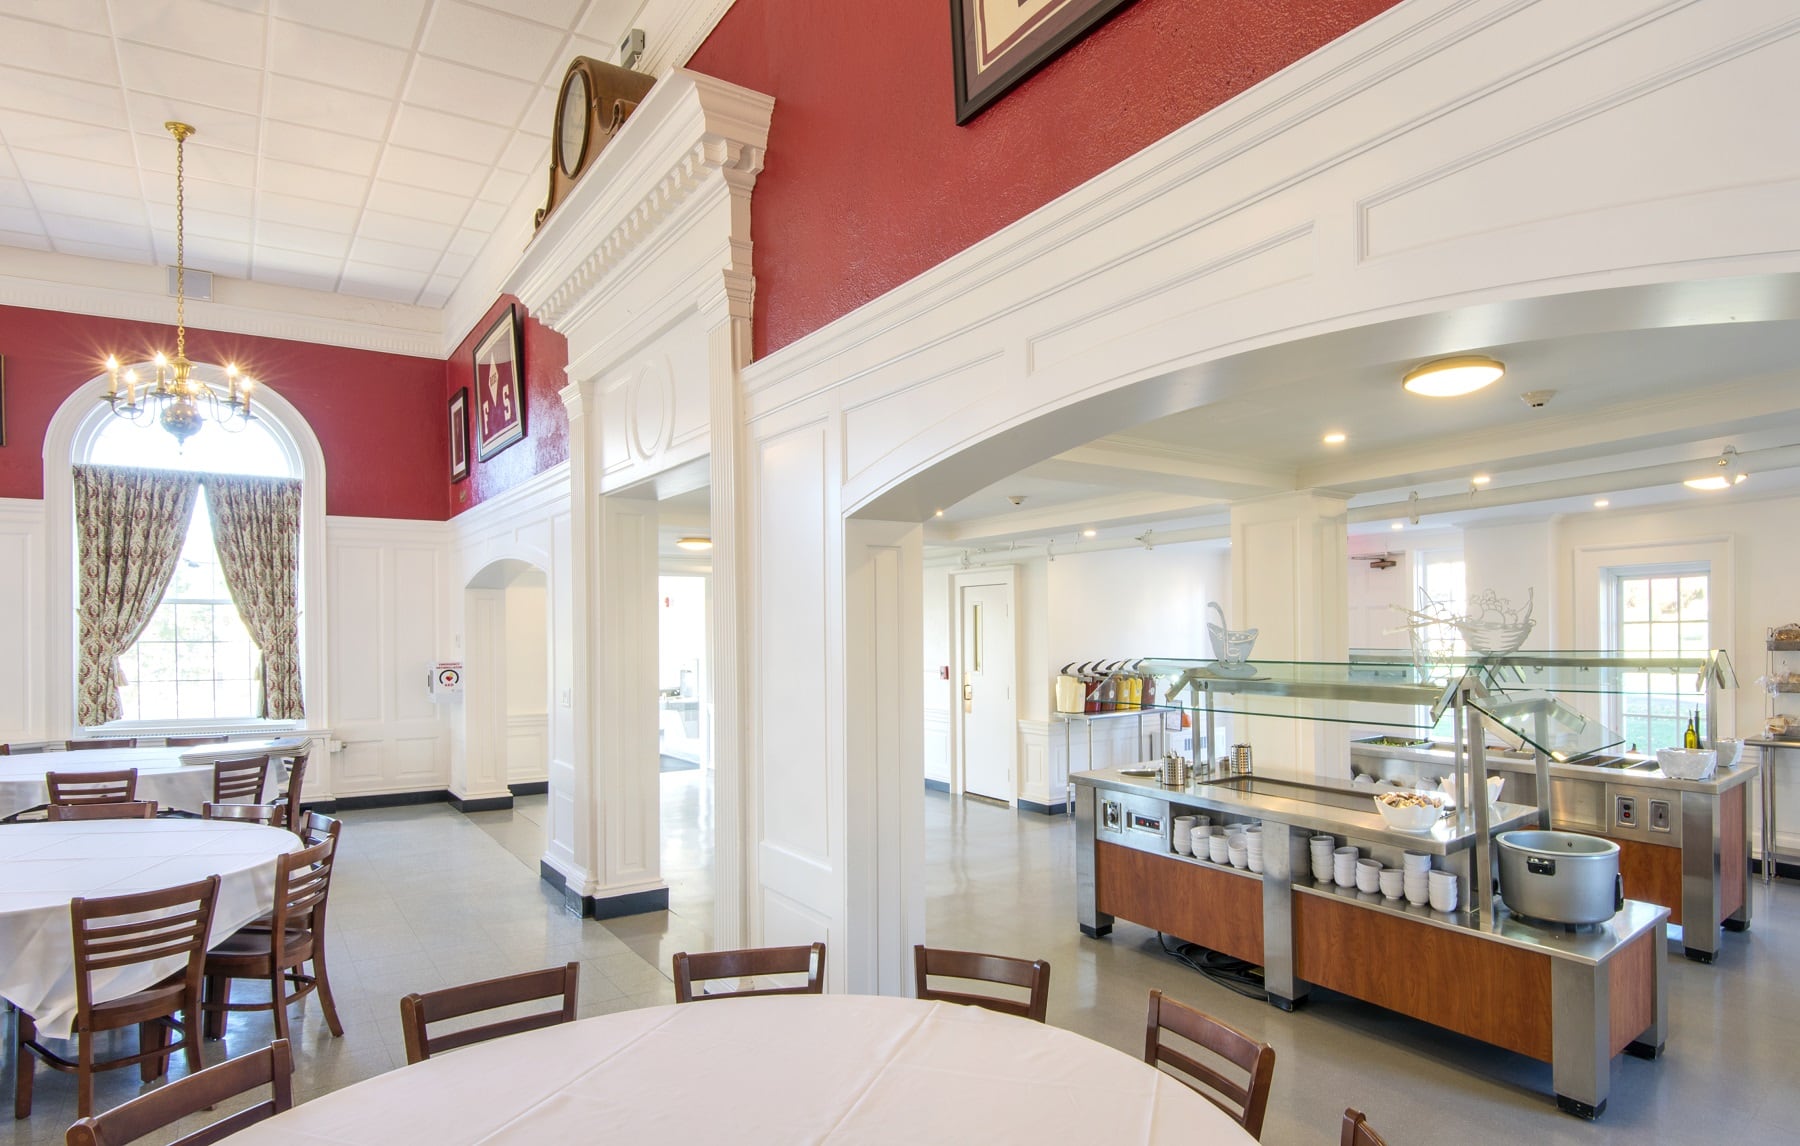 Fay School Dining Hall - Campus Architecture